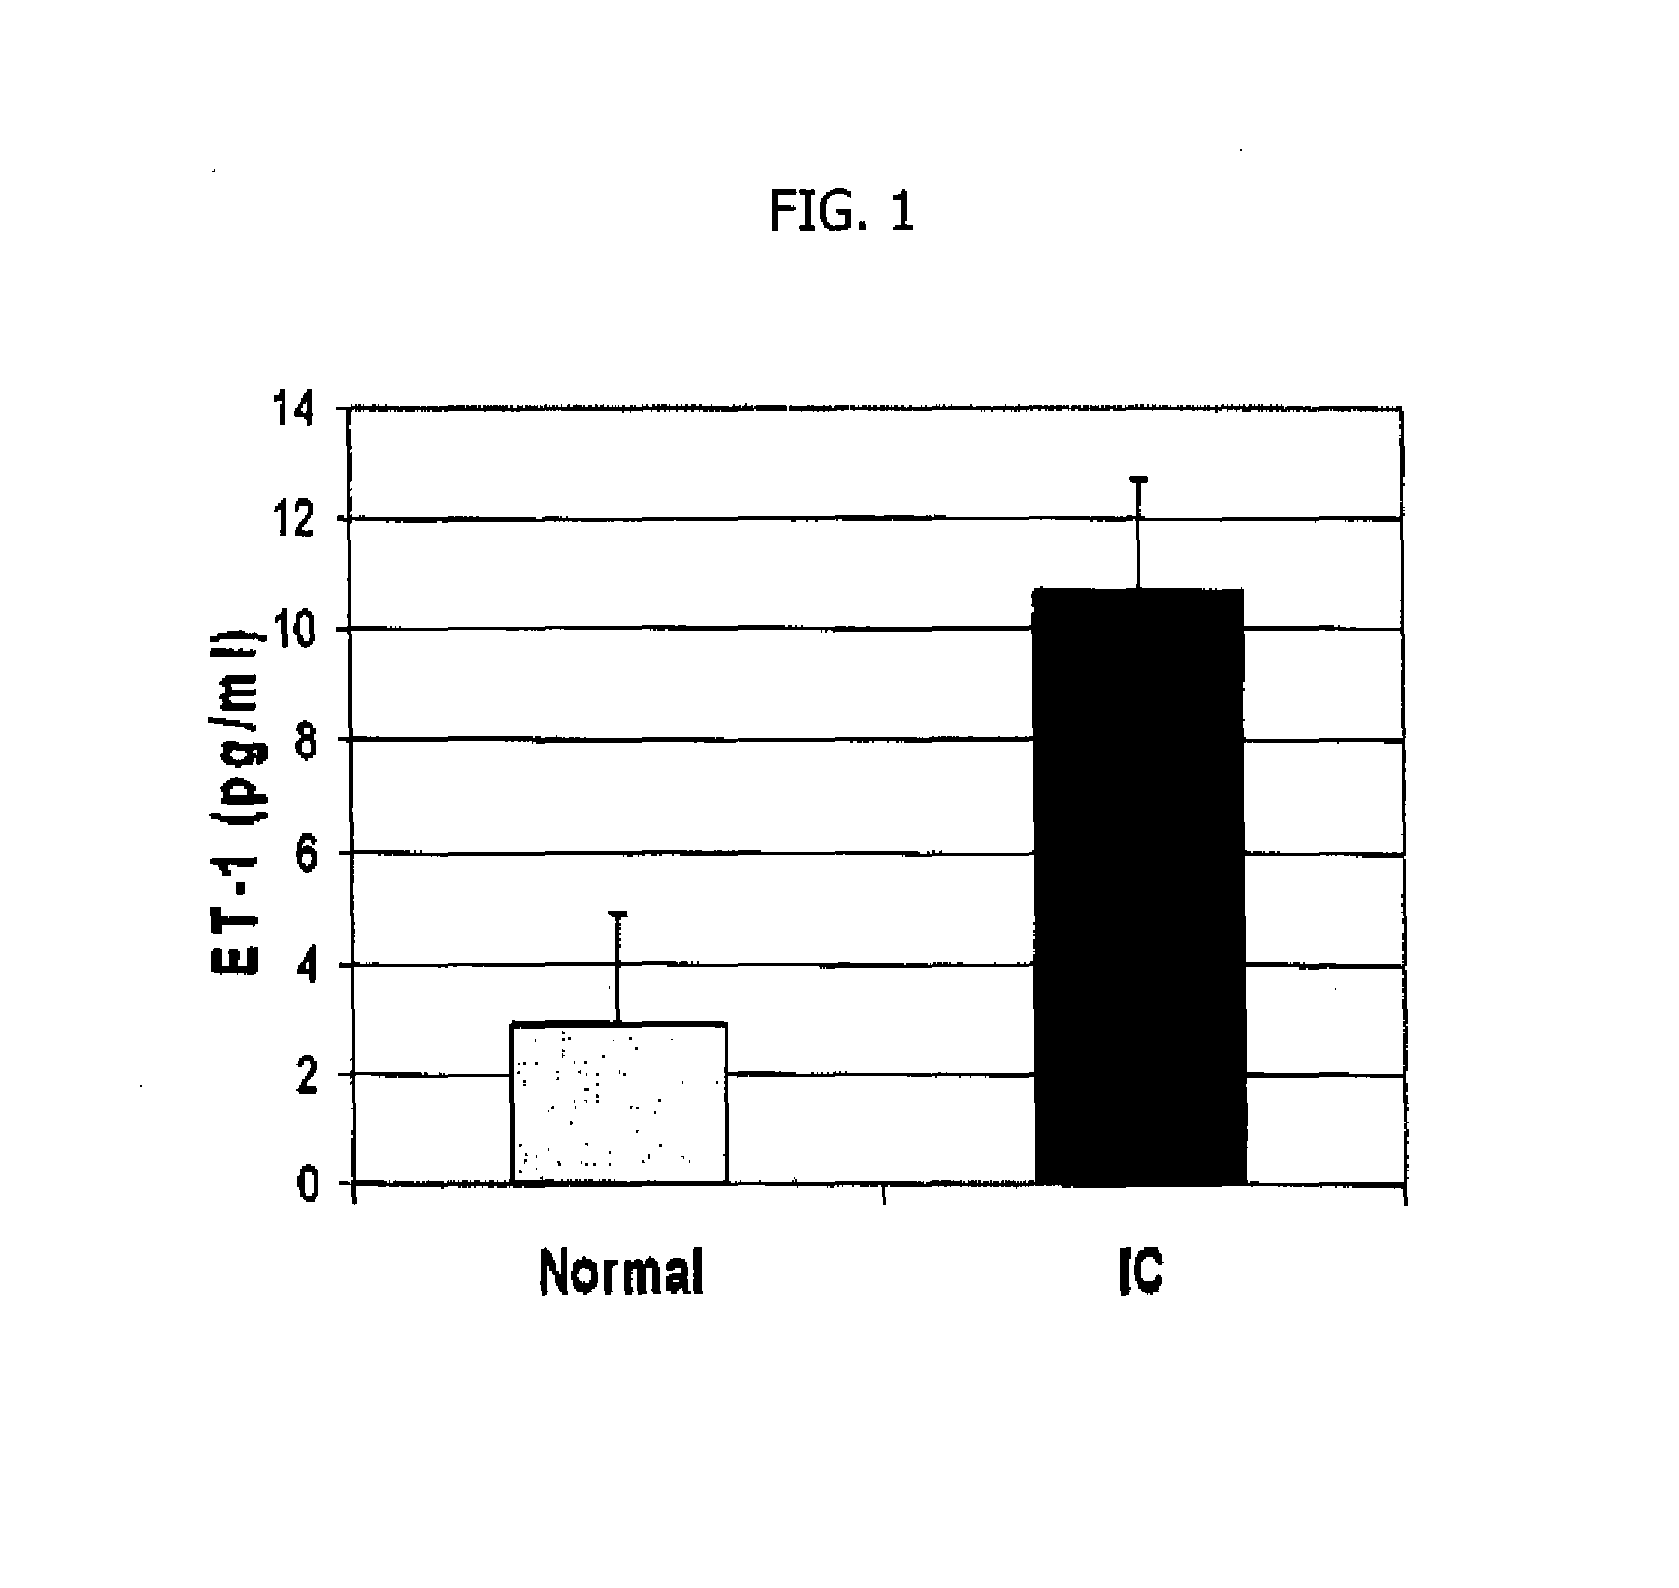 Method of diagnosing and treating interstitial cystitis